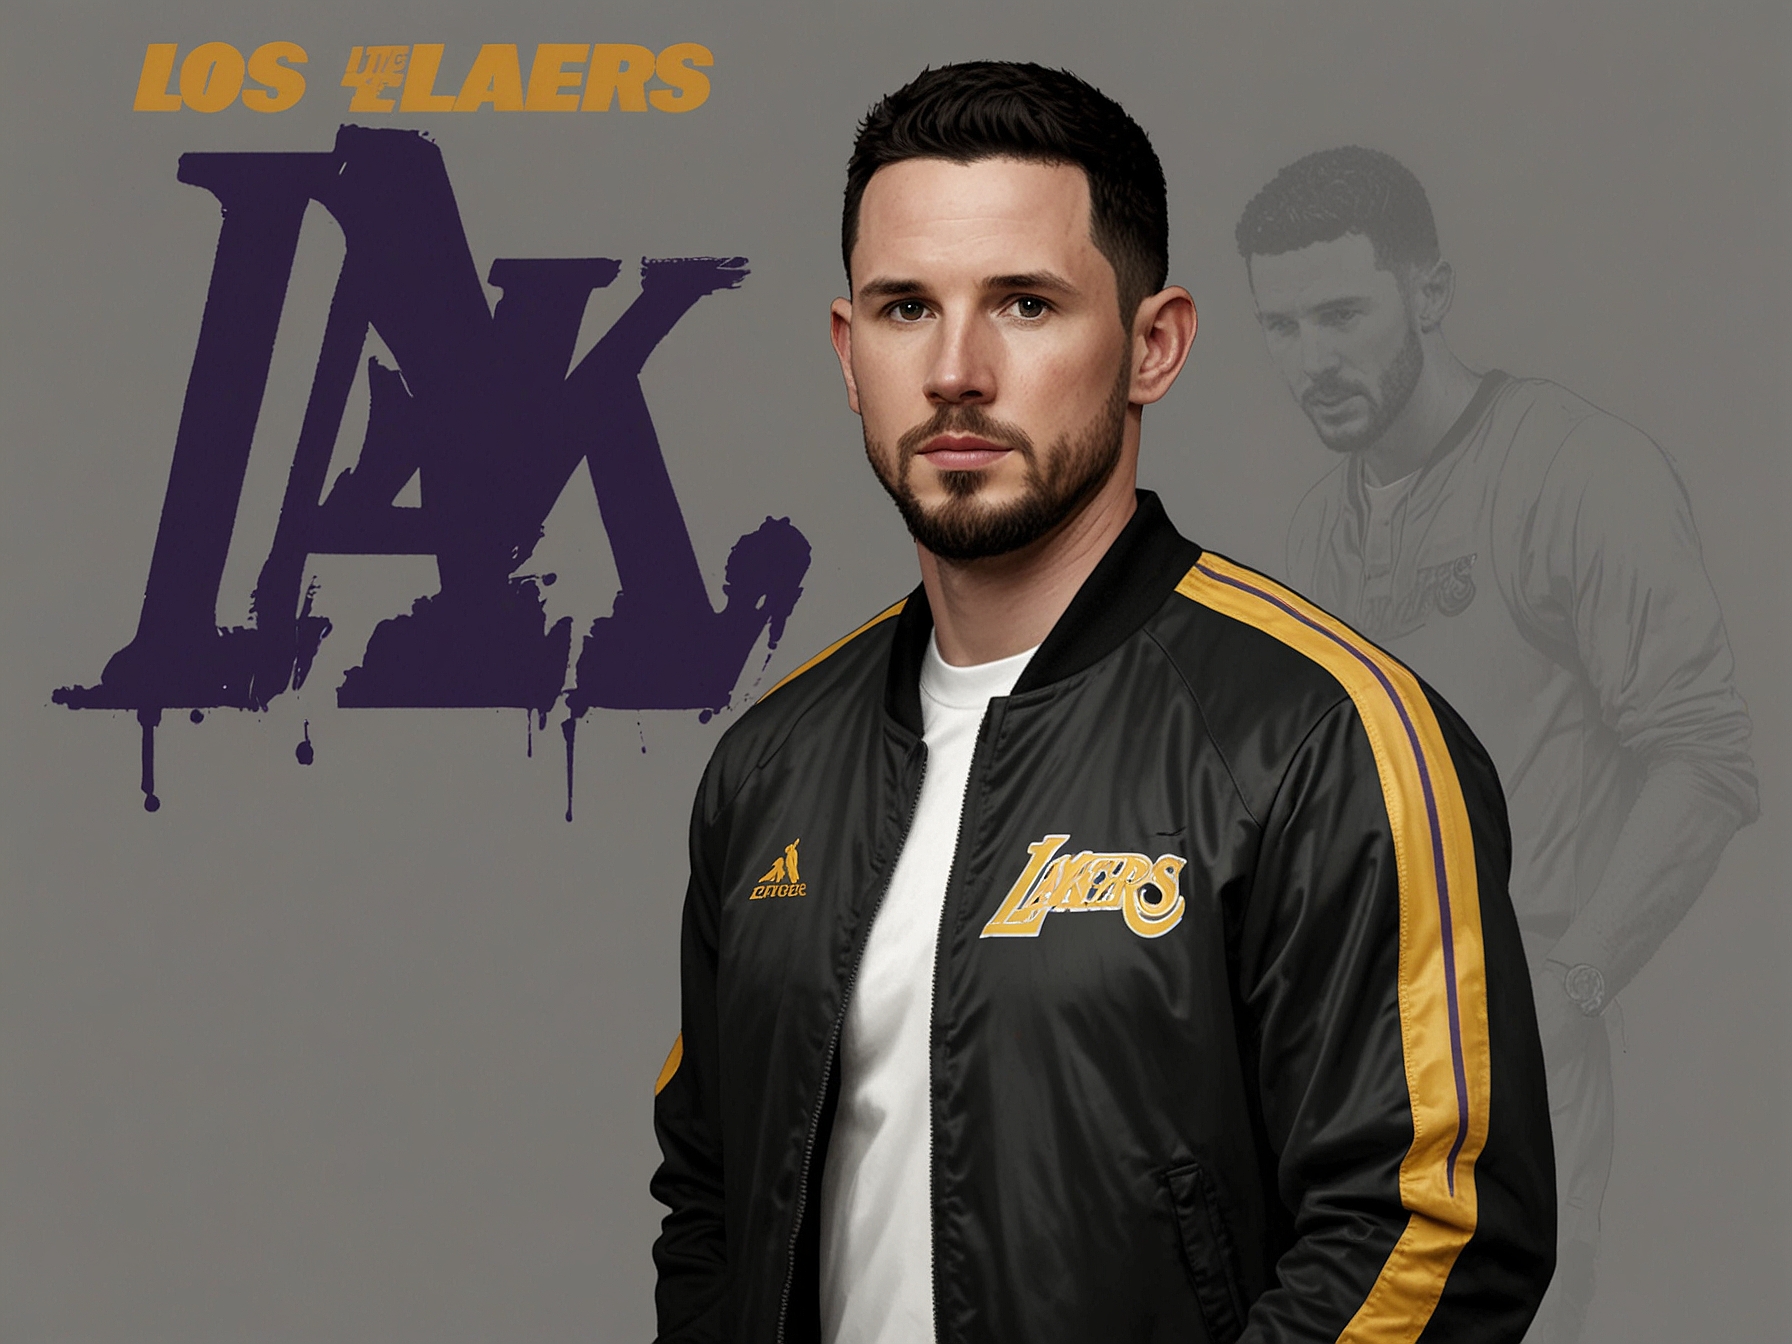 JJ Redick, the newly appointed head coach of the Los Angeles Lakers, poses confidently in a Lakers jacket while standing on the court. His deep understanding of basketball is evident in his demeanor.